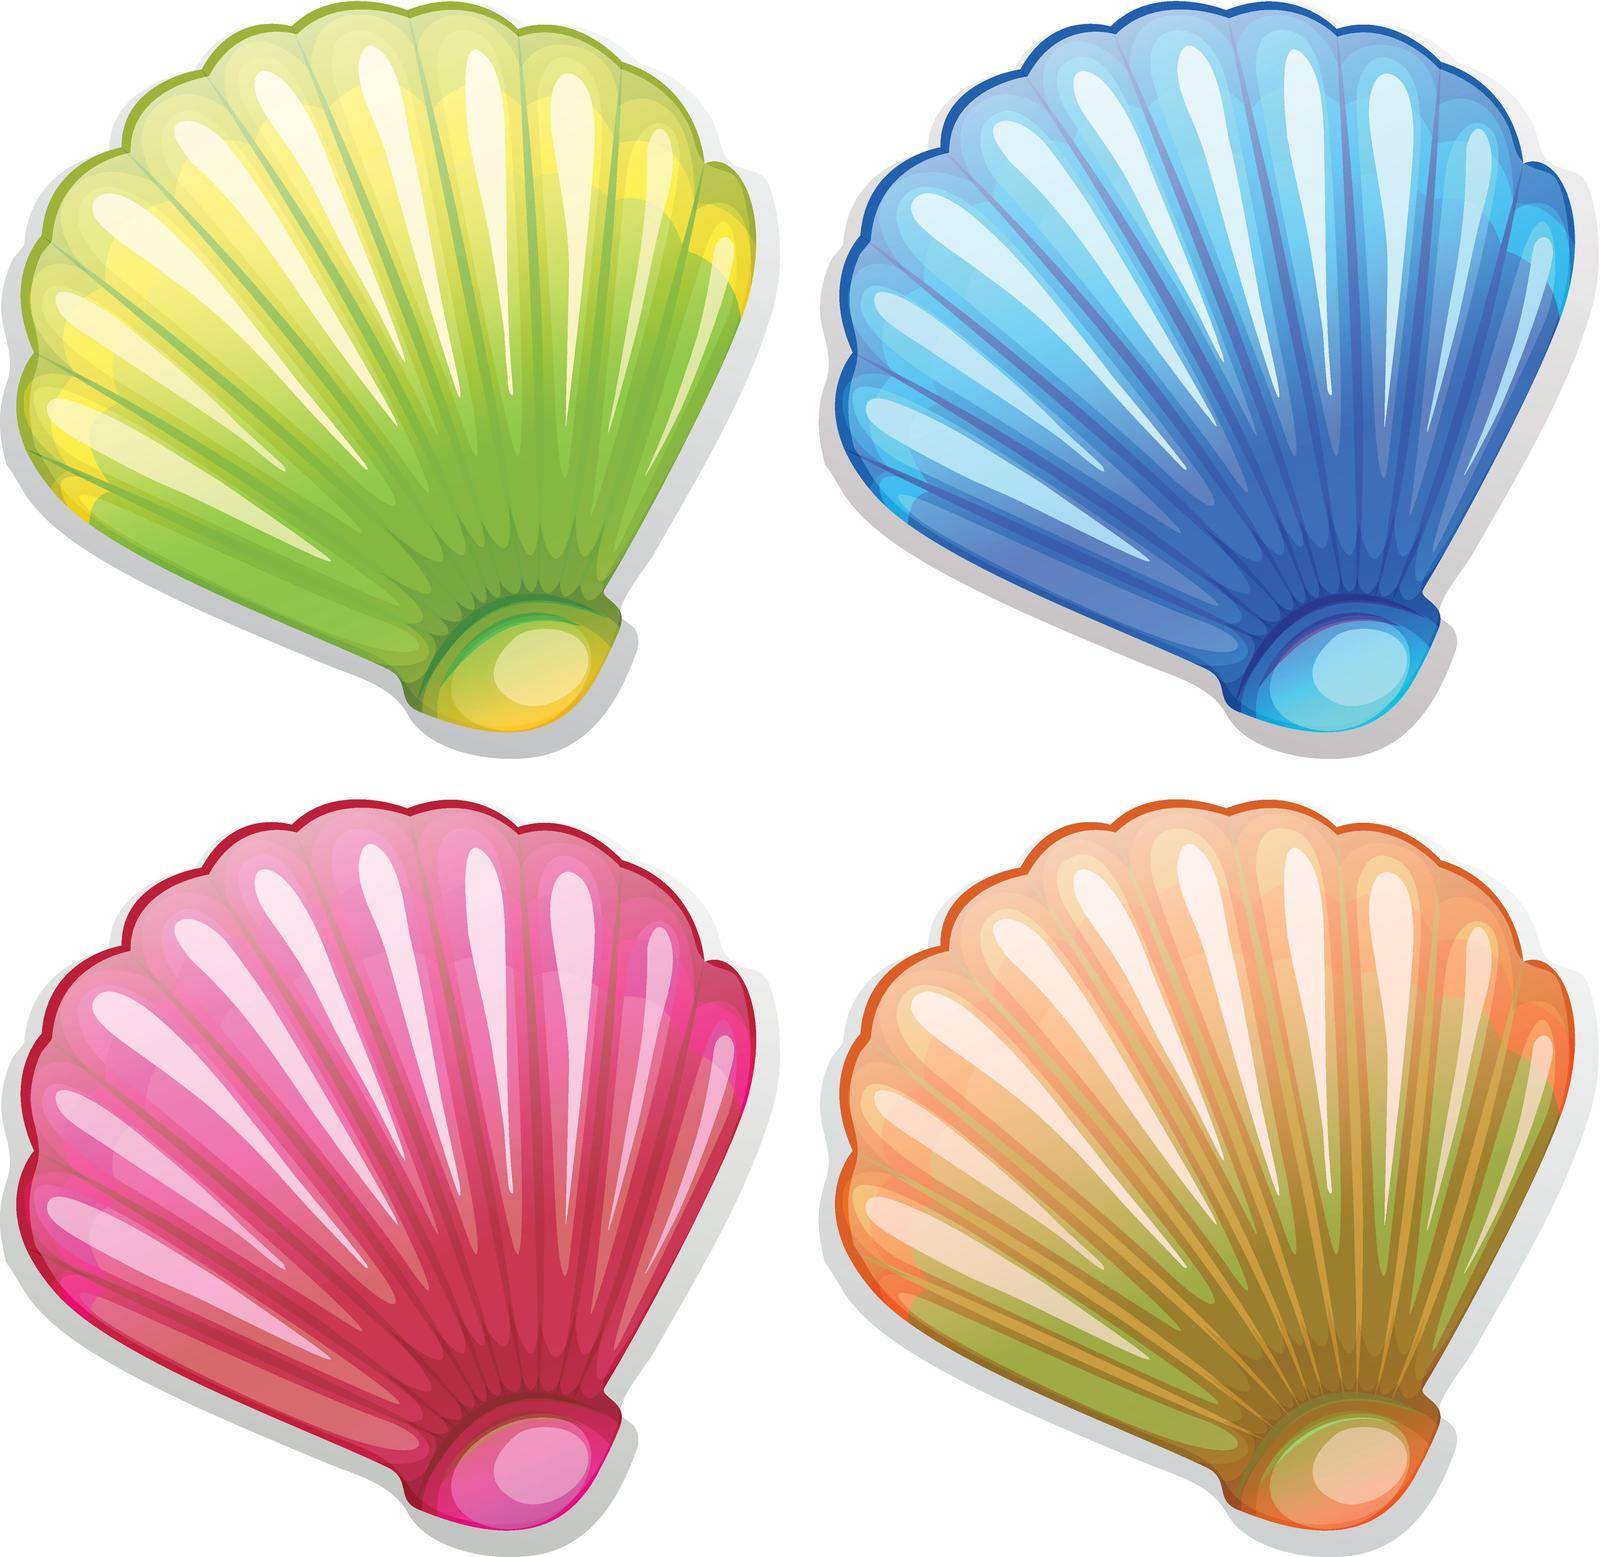 Colourful shells by iimages